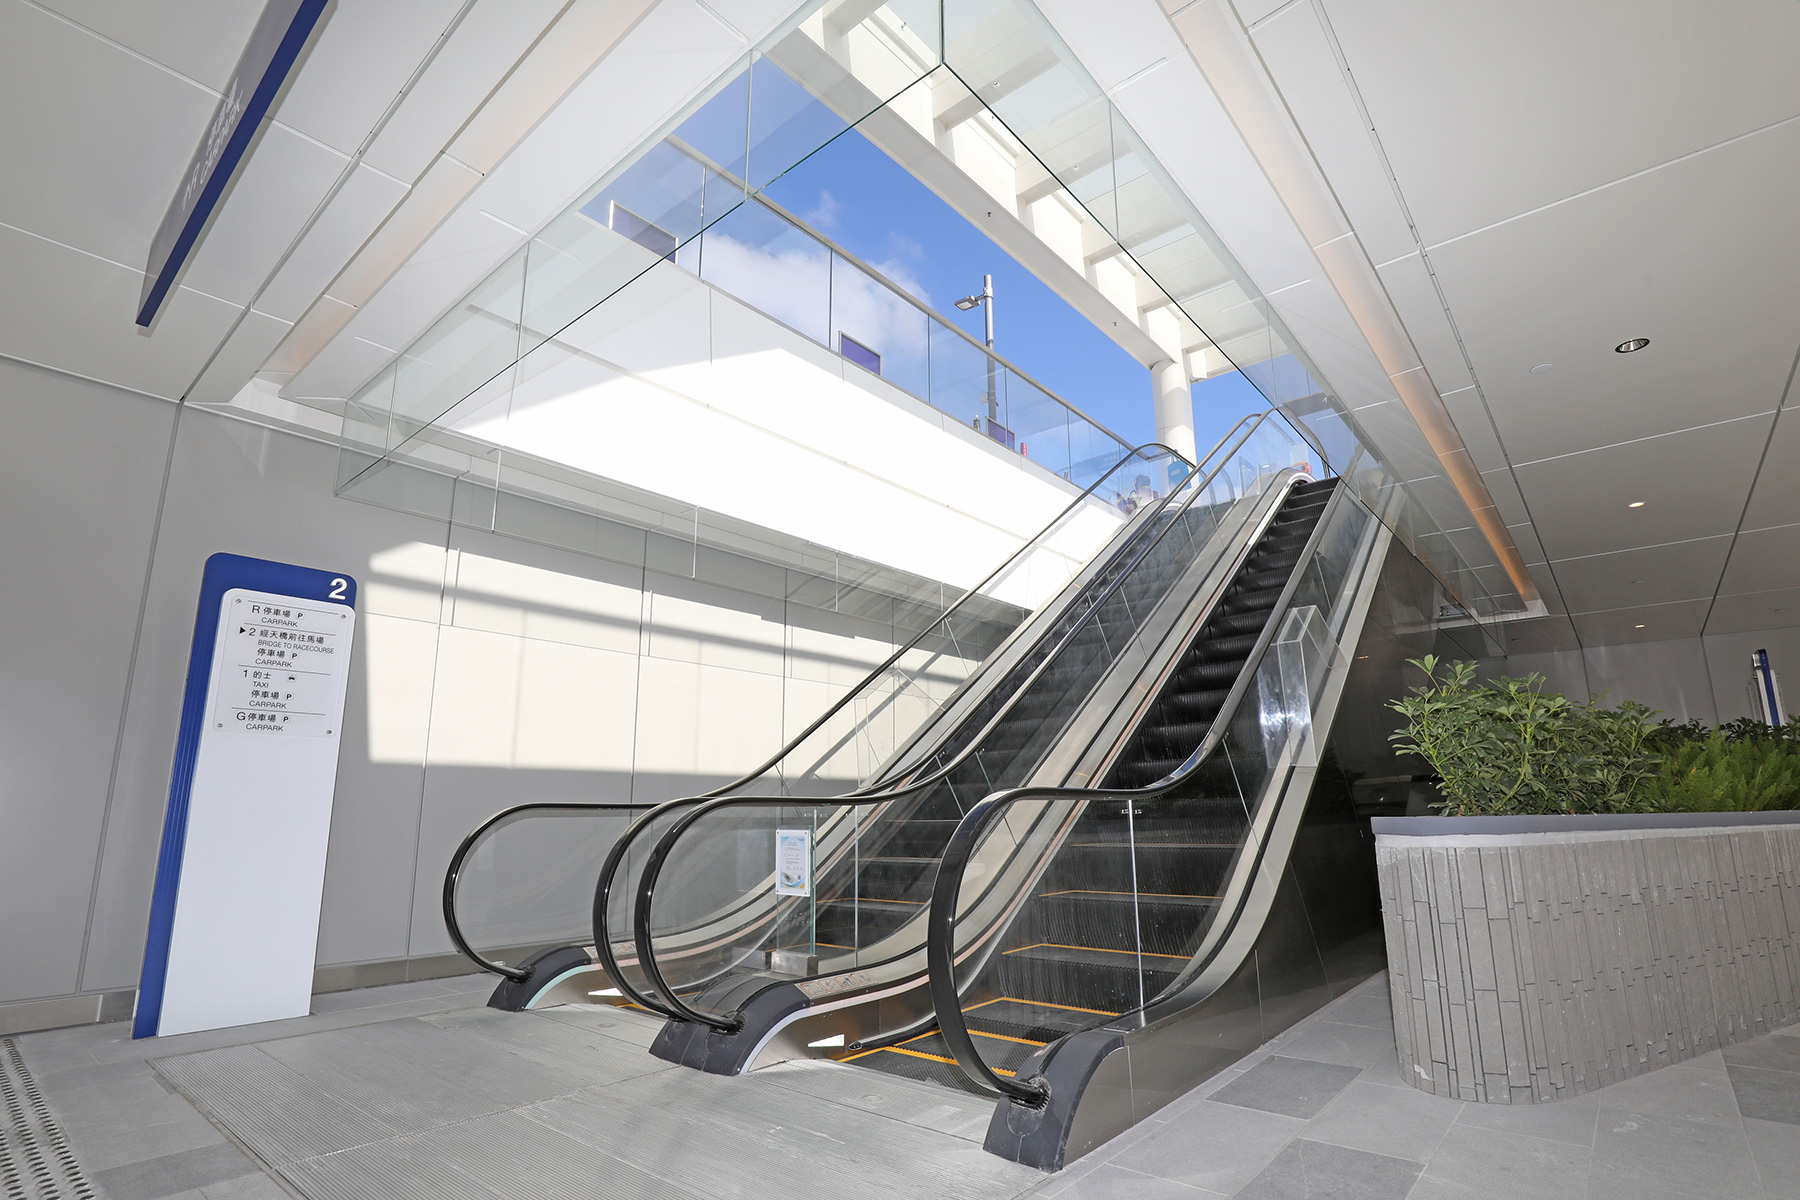 Twelve new escalators and three lifts in P1 Car Park and Grandstand I to offer ease of connectivity to various parts of Sha Tin Racecourse.